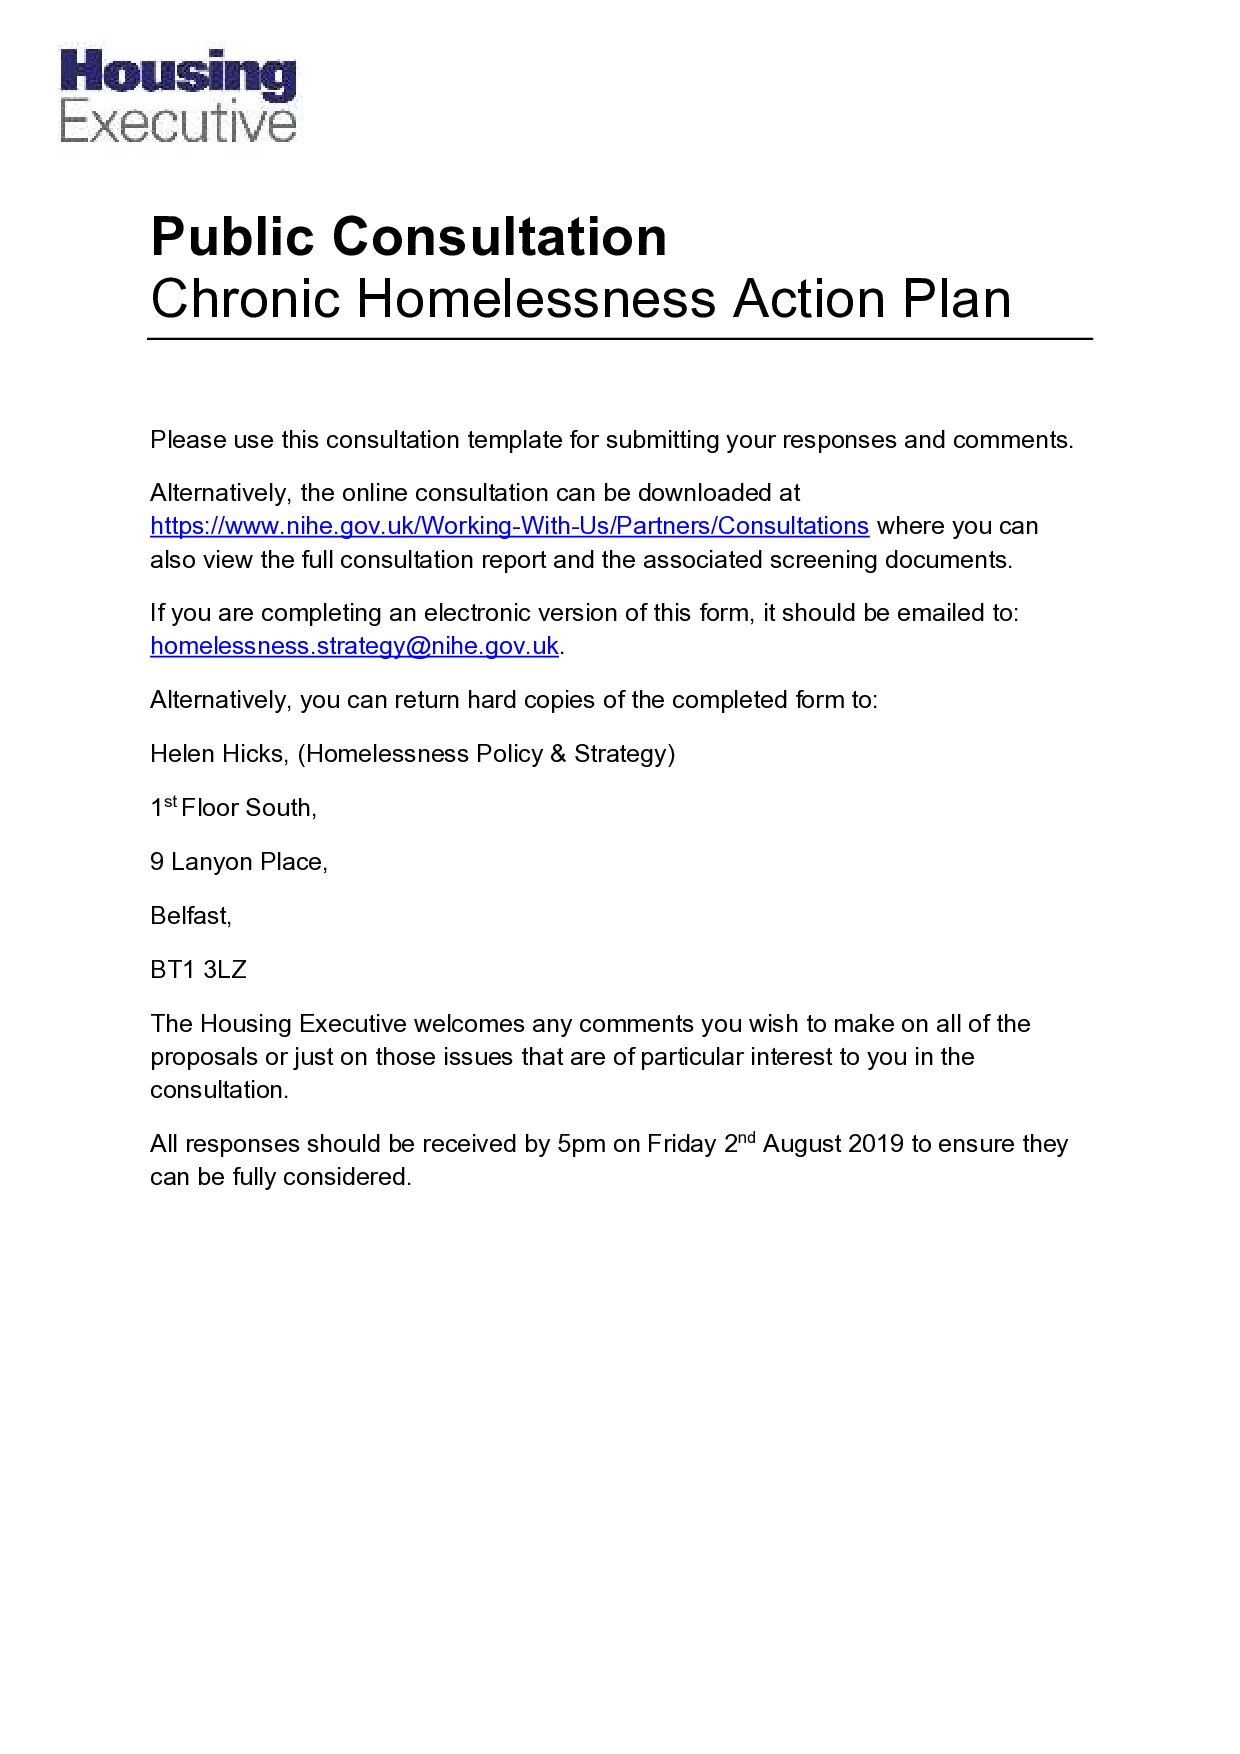 Response to the NI Housing Executive's consultation on its Chronic Homelessness Action Plan